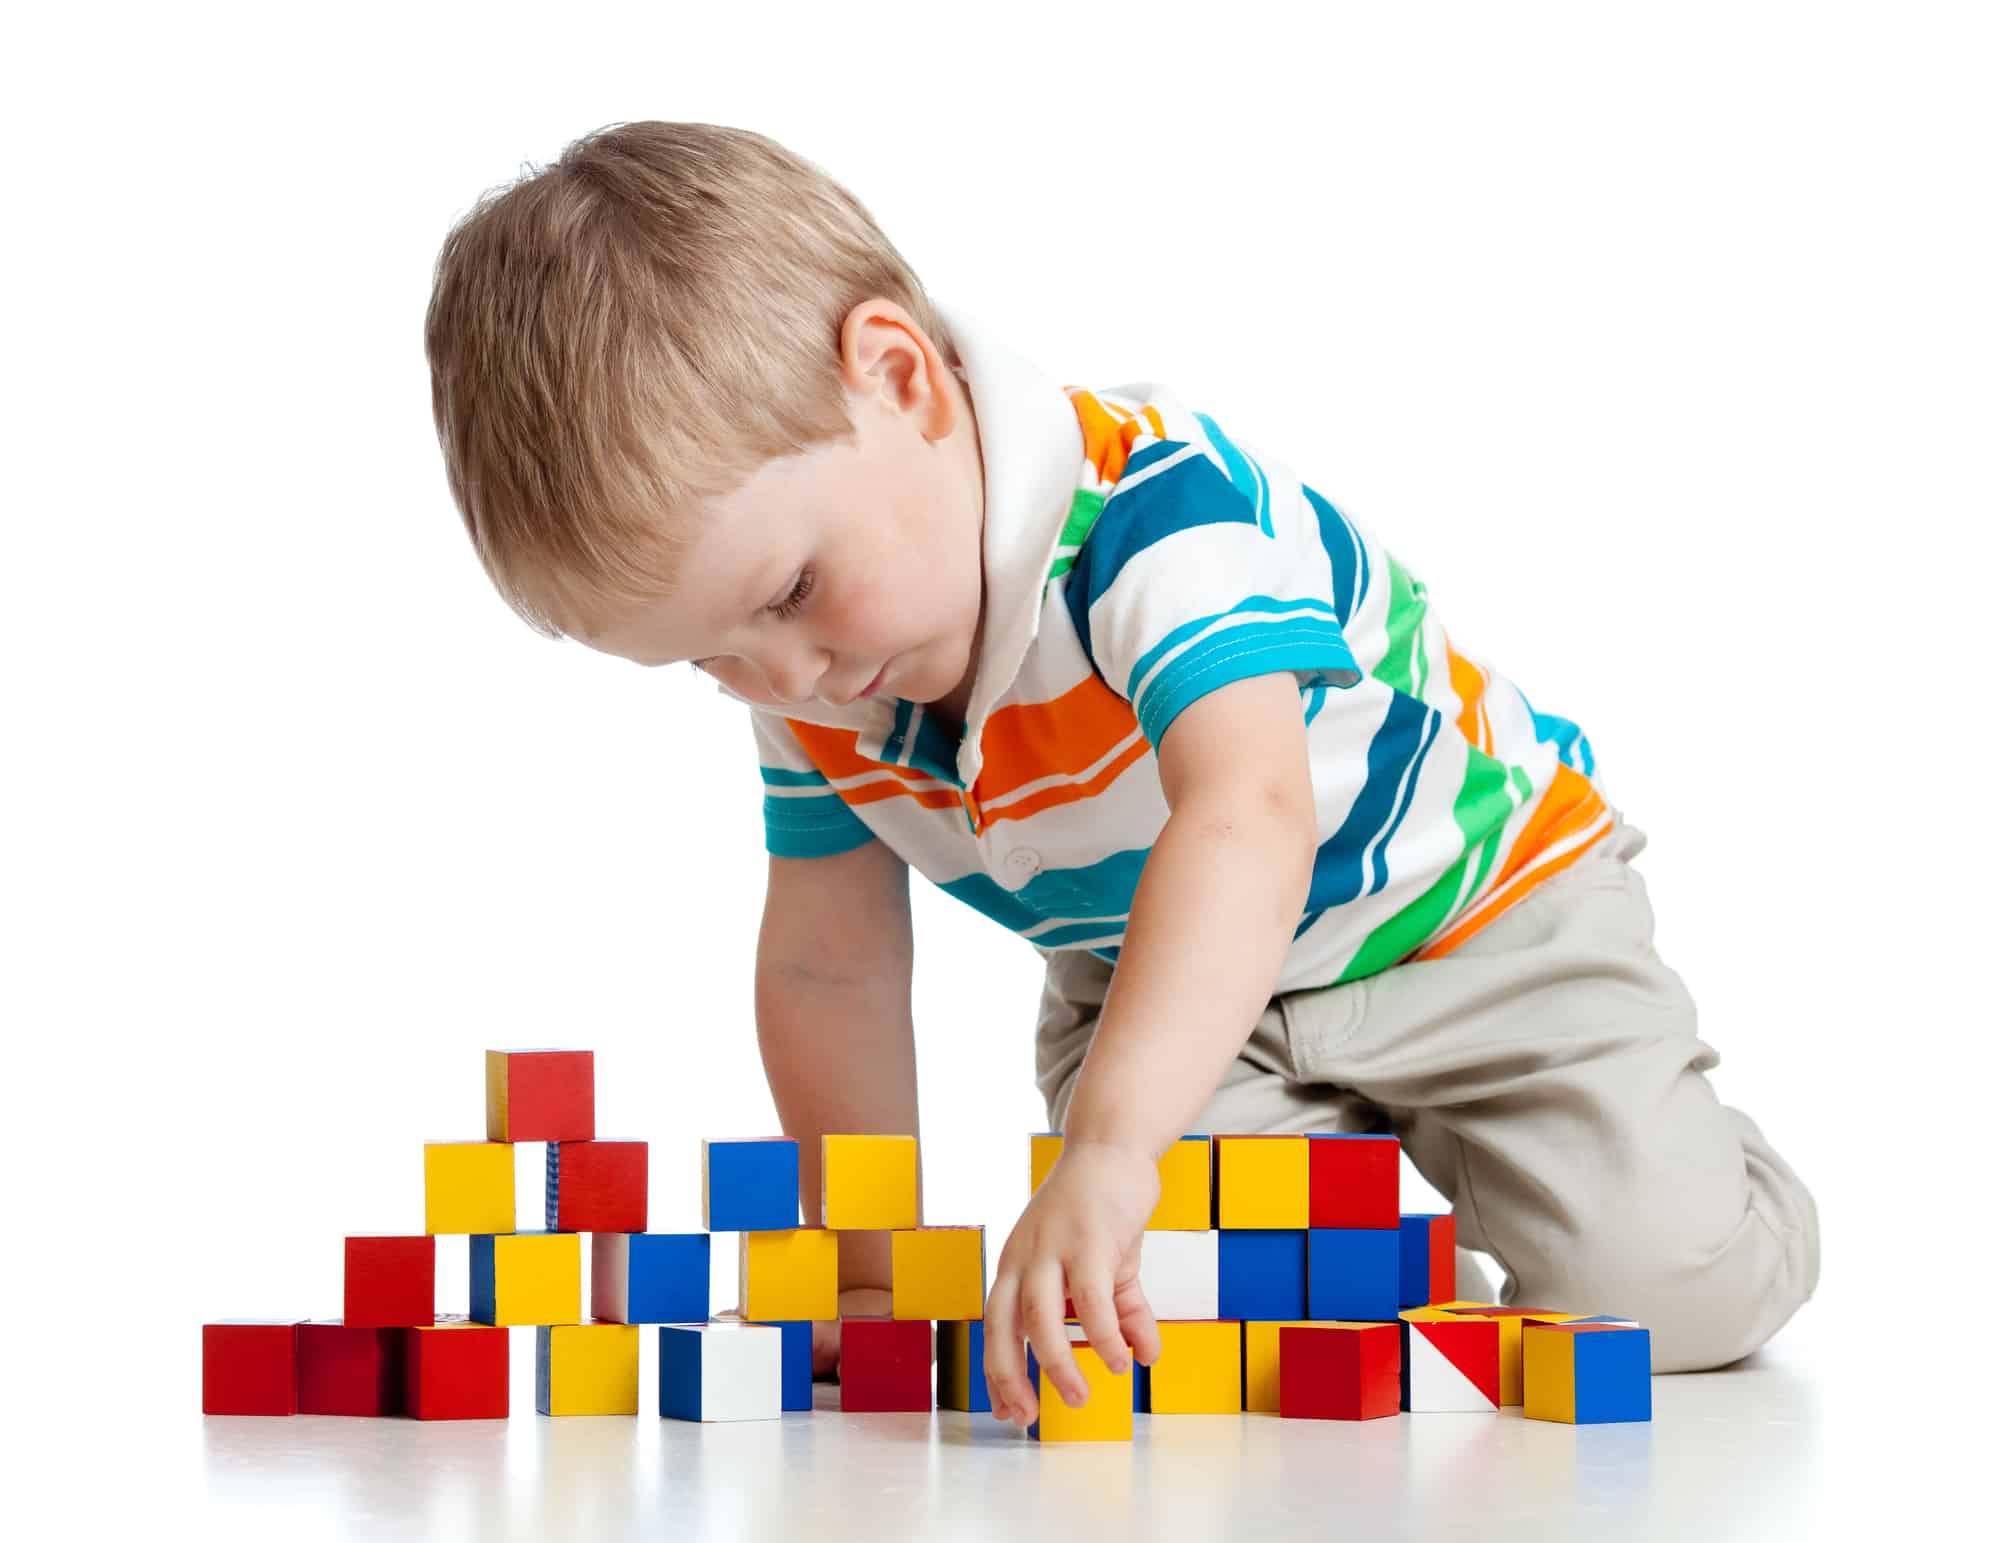 A little boy in a striped shirt building a wall with colorful square blocks